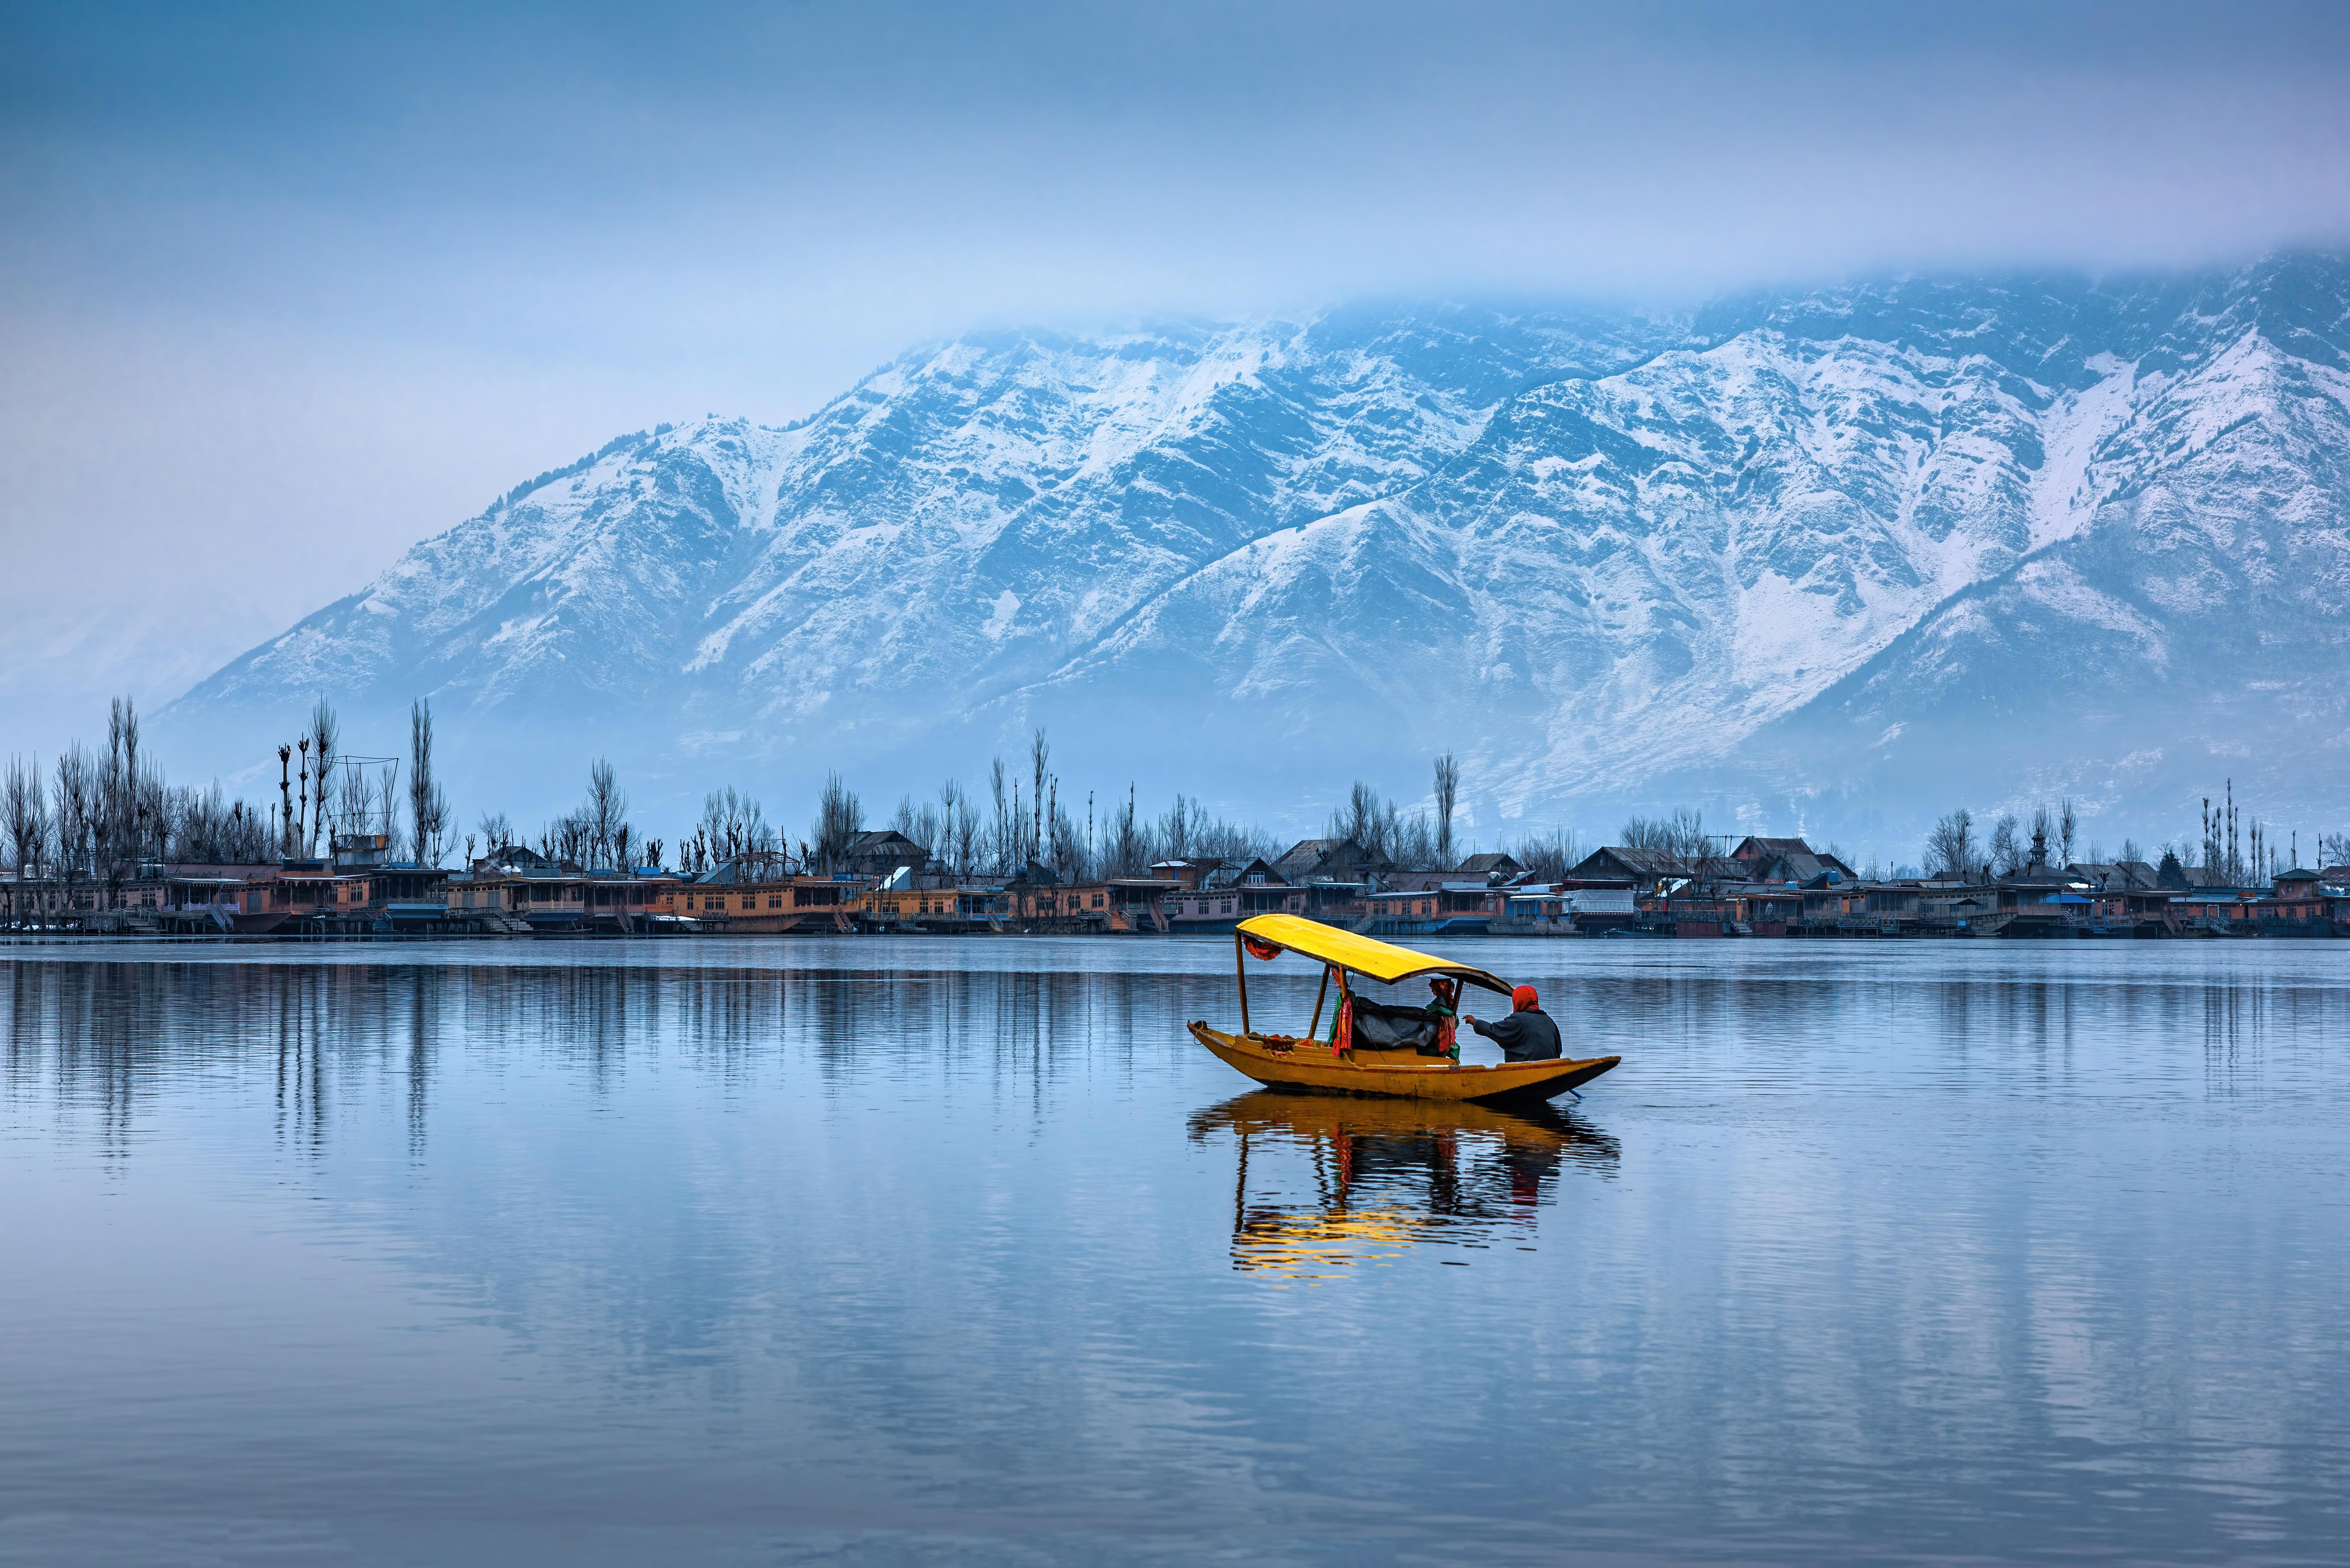 Srinagar Tour Packages | UPTO 50% Off February Month Offer